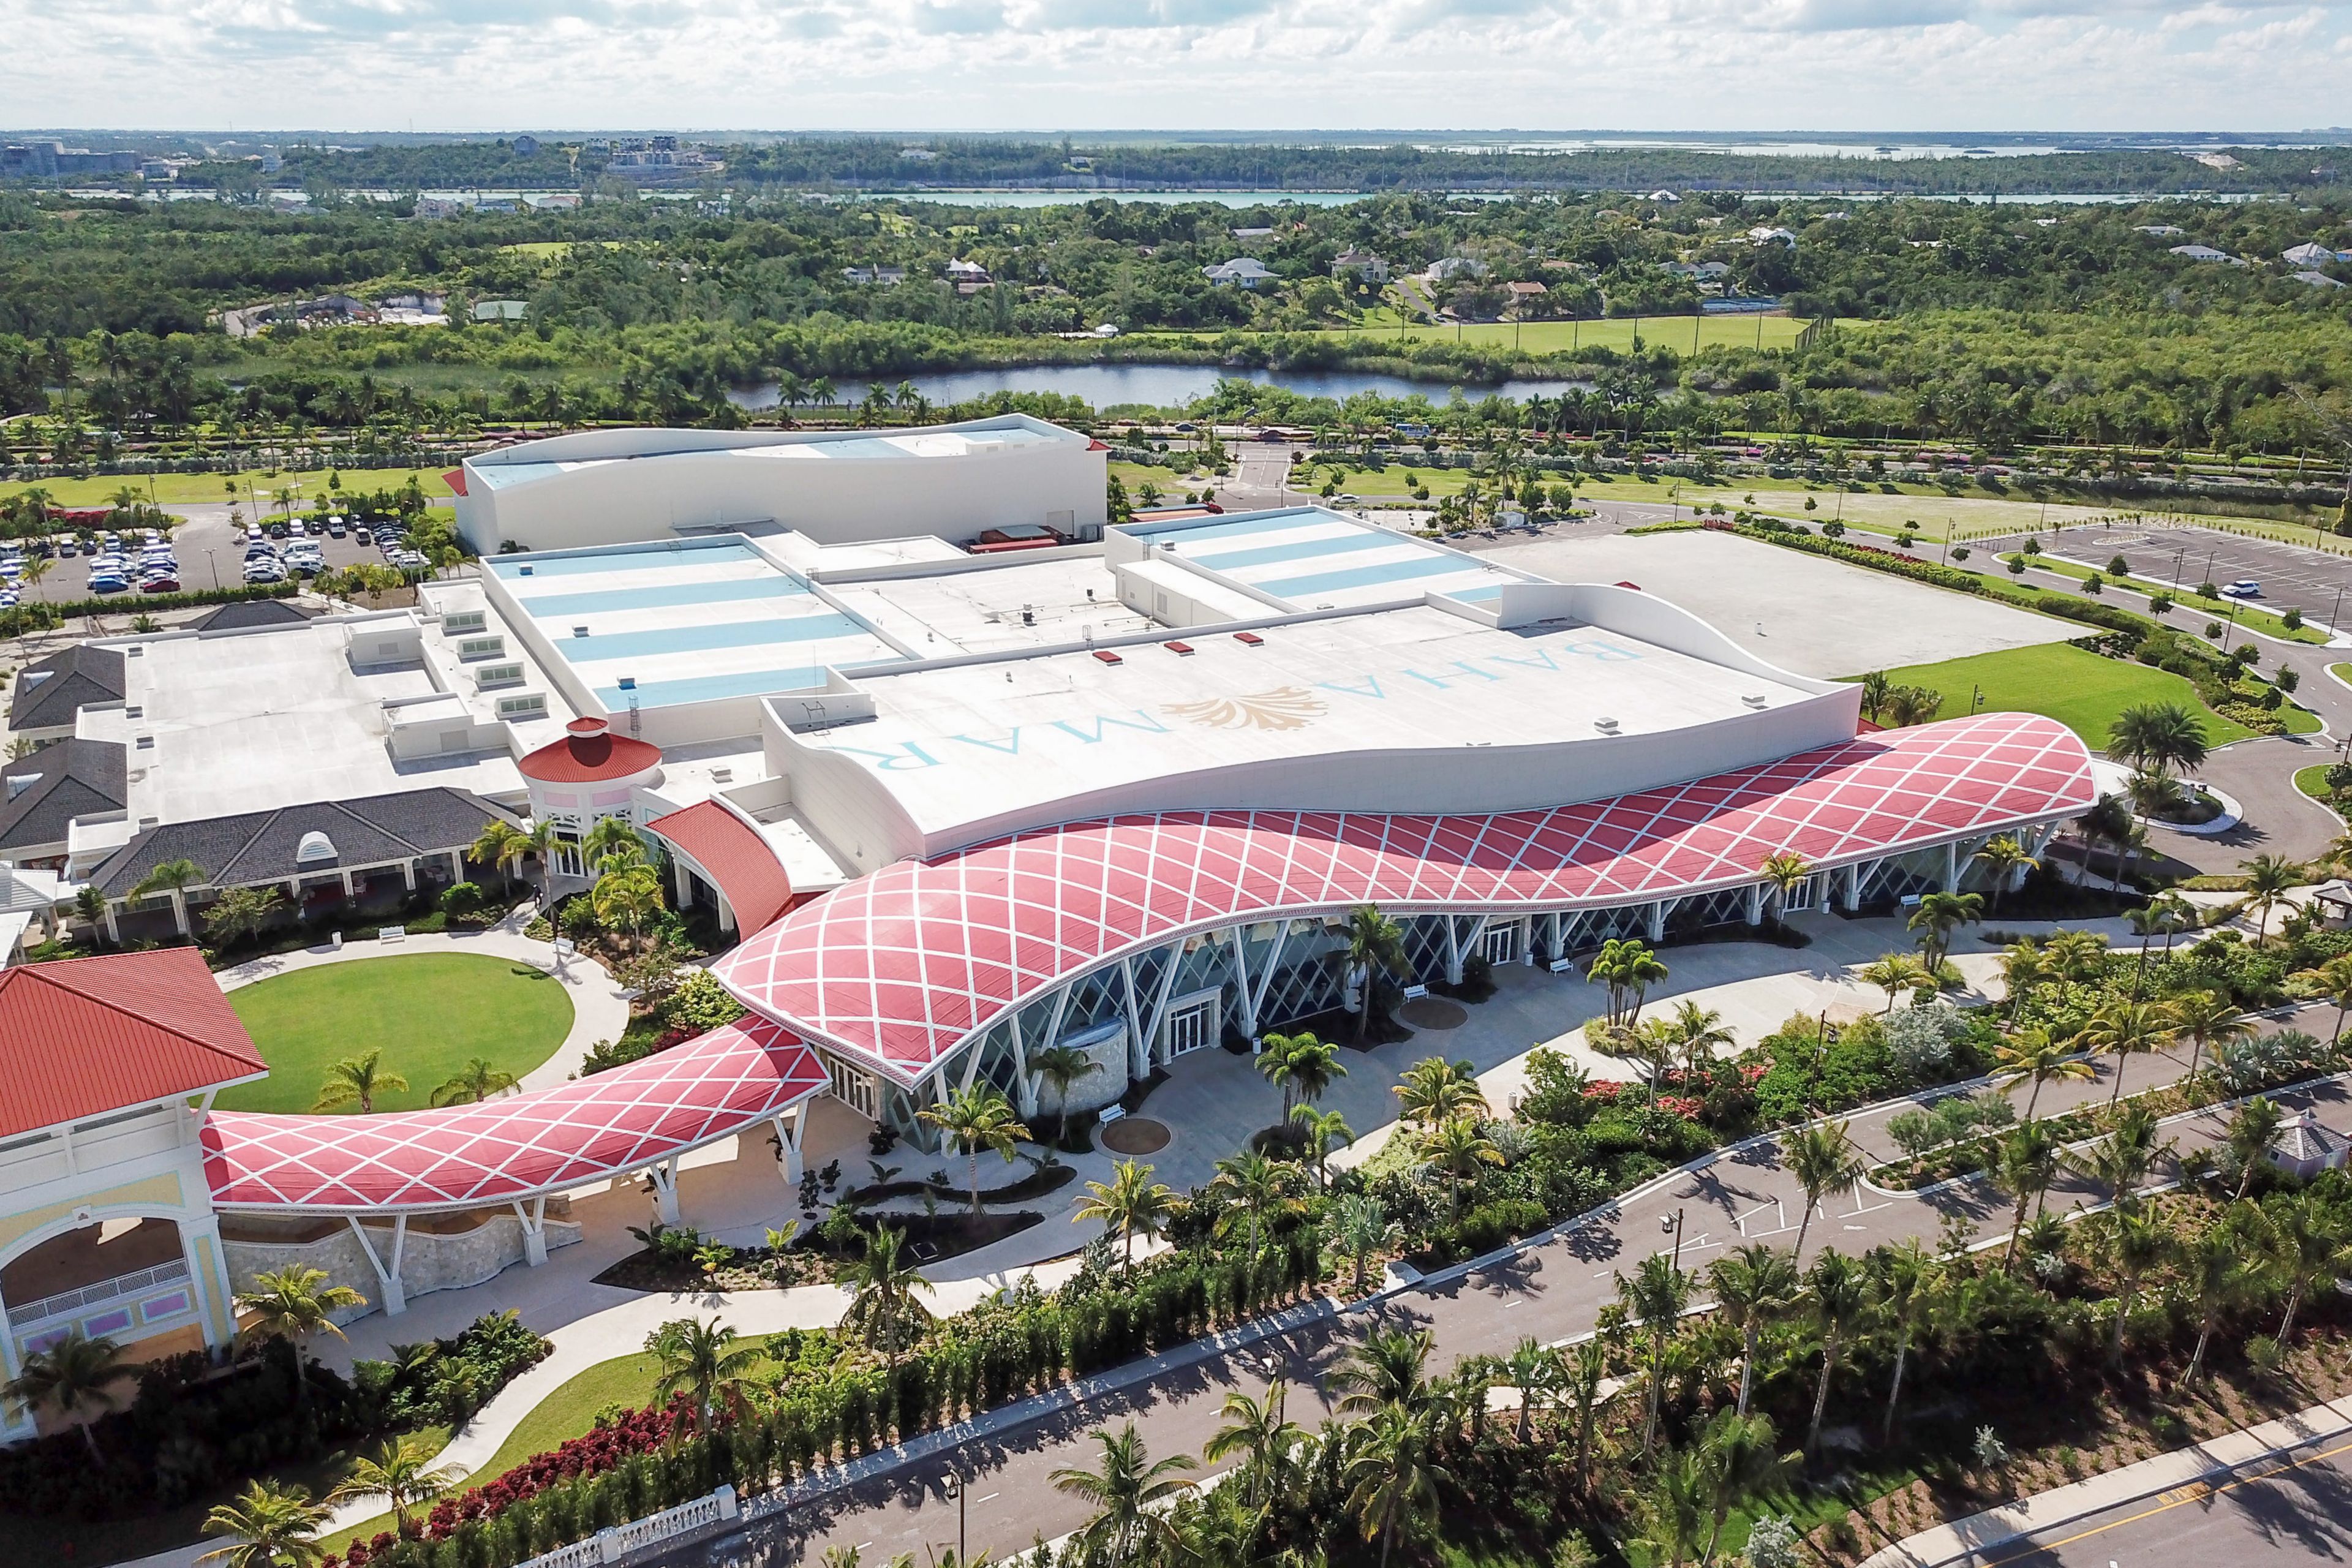 Single-ply roof PVC membrane of Sarnafil adhered roofing system installed on  Baha Mar Resort in the Bahamas